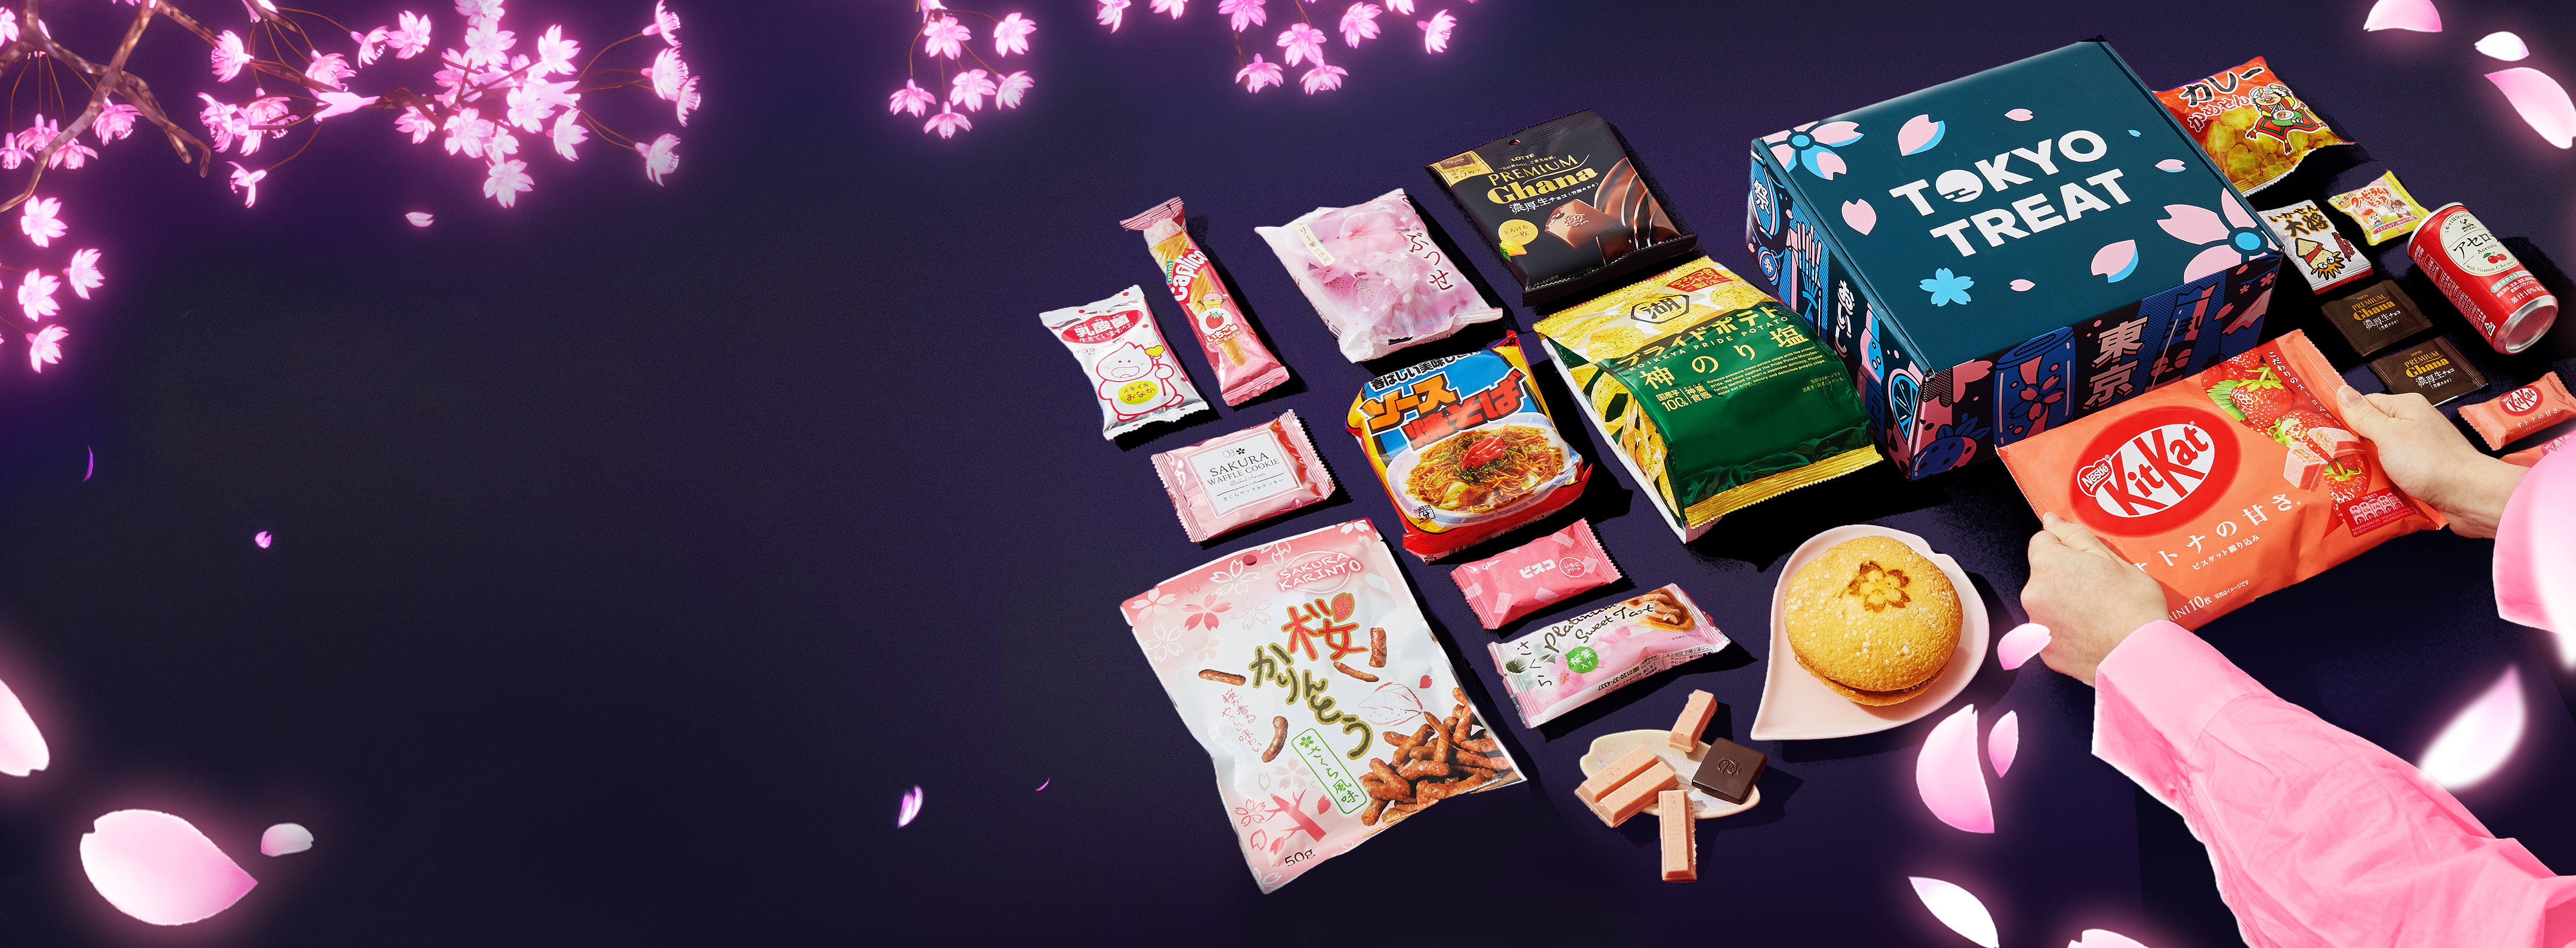 TokyoTreat box sits against a dark purple background, surrounded by cherry blossoms and box items.